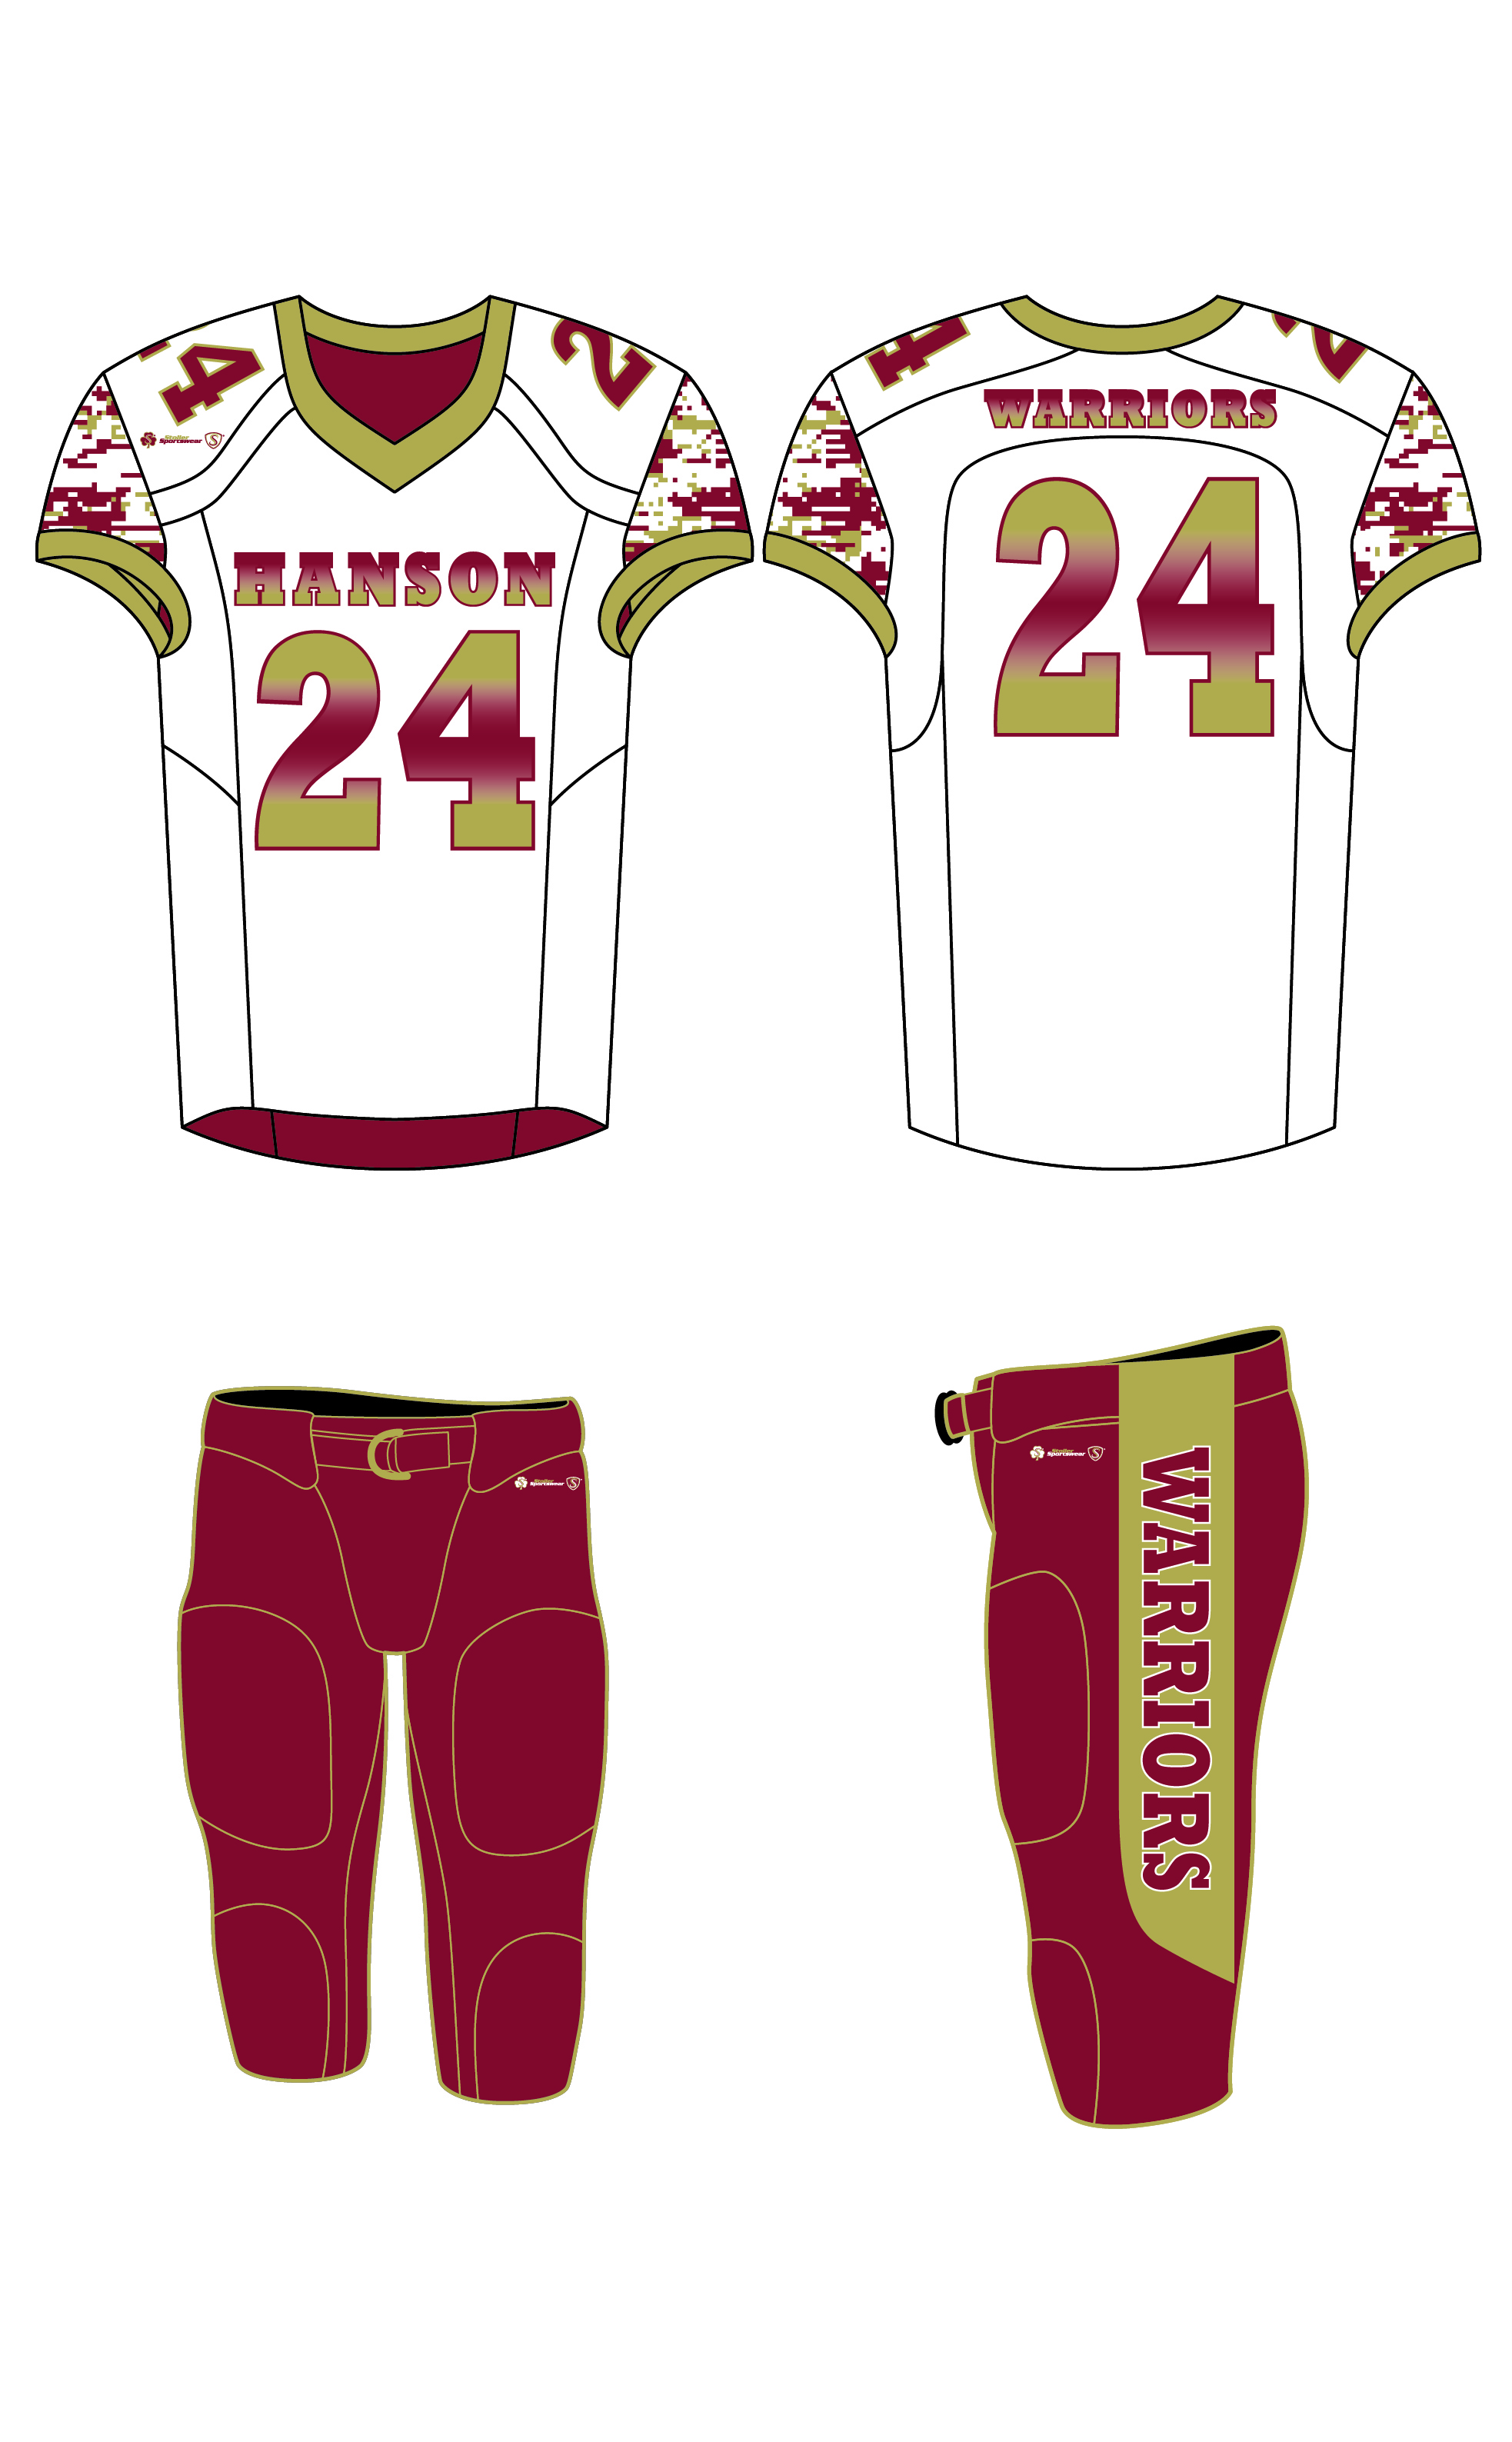 Sublimated Jersey - Hanson Warriors White